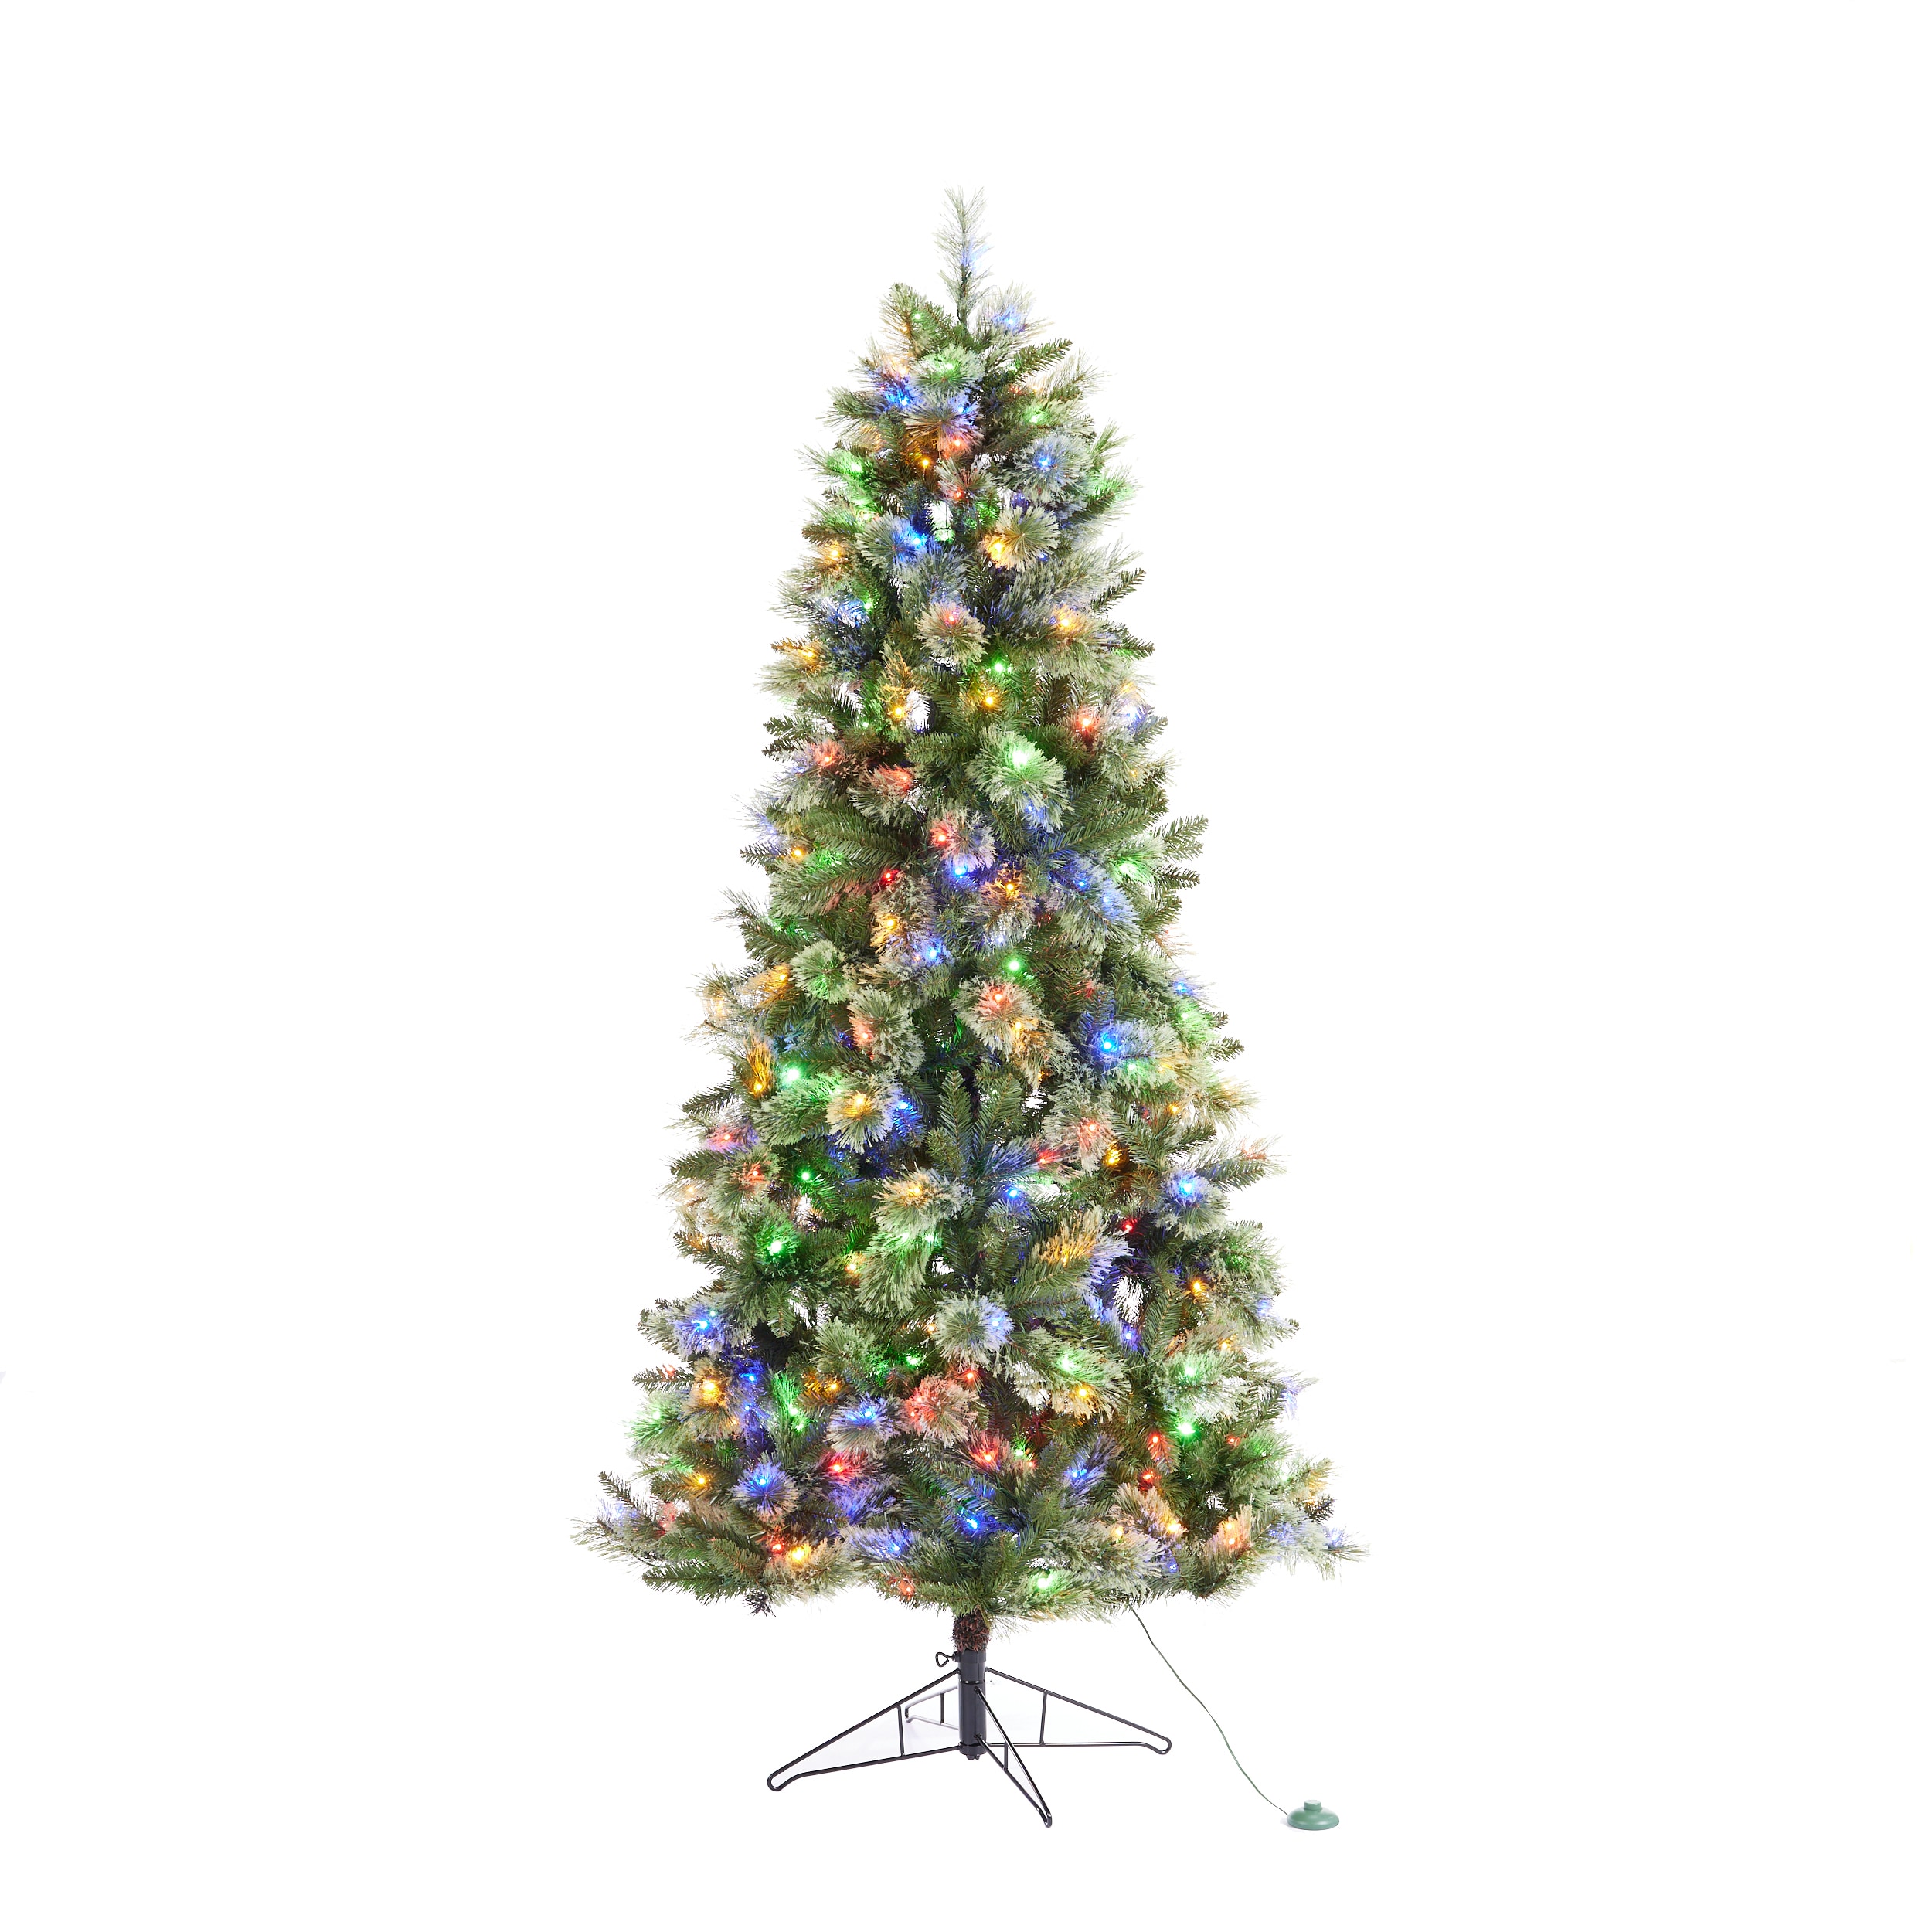 Green Lighted Wood Christmas Tree, Hand Made, Plug-in Inserted